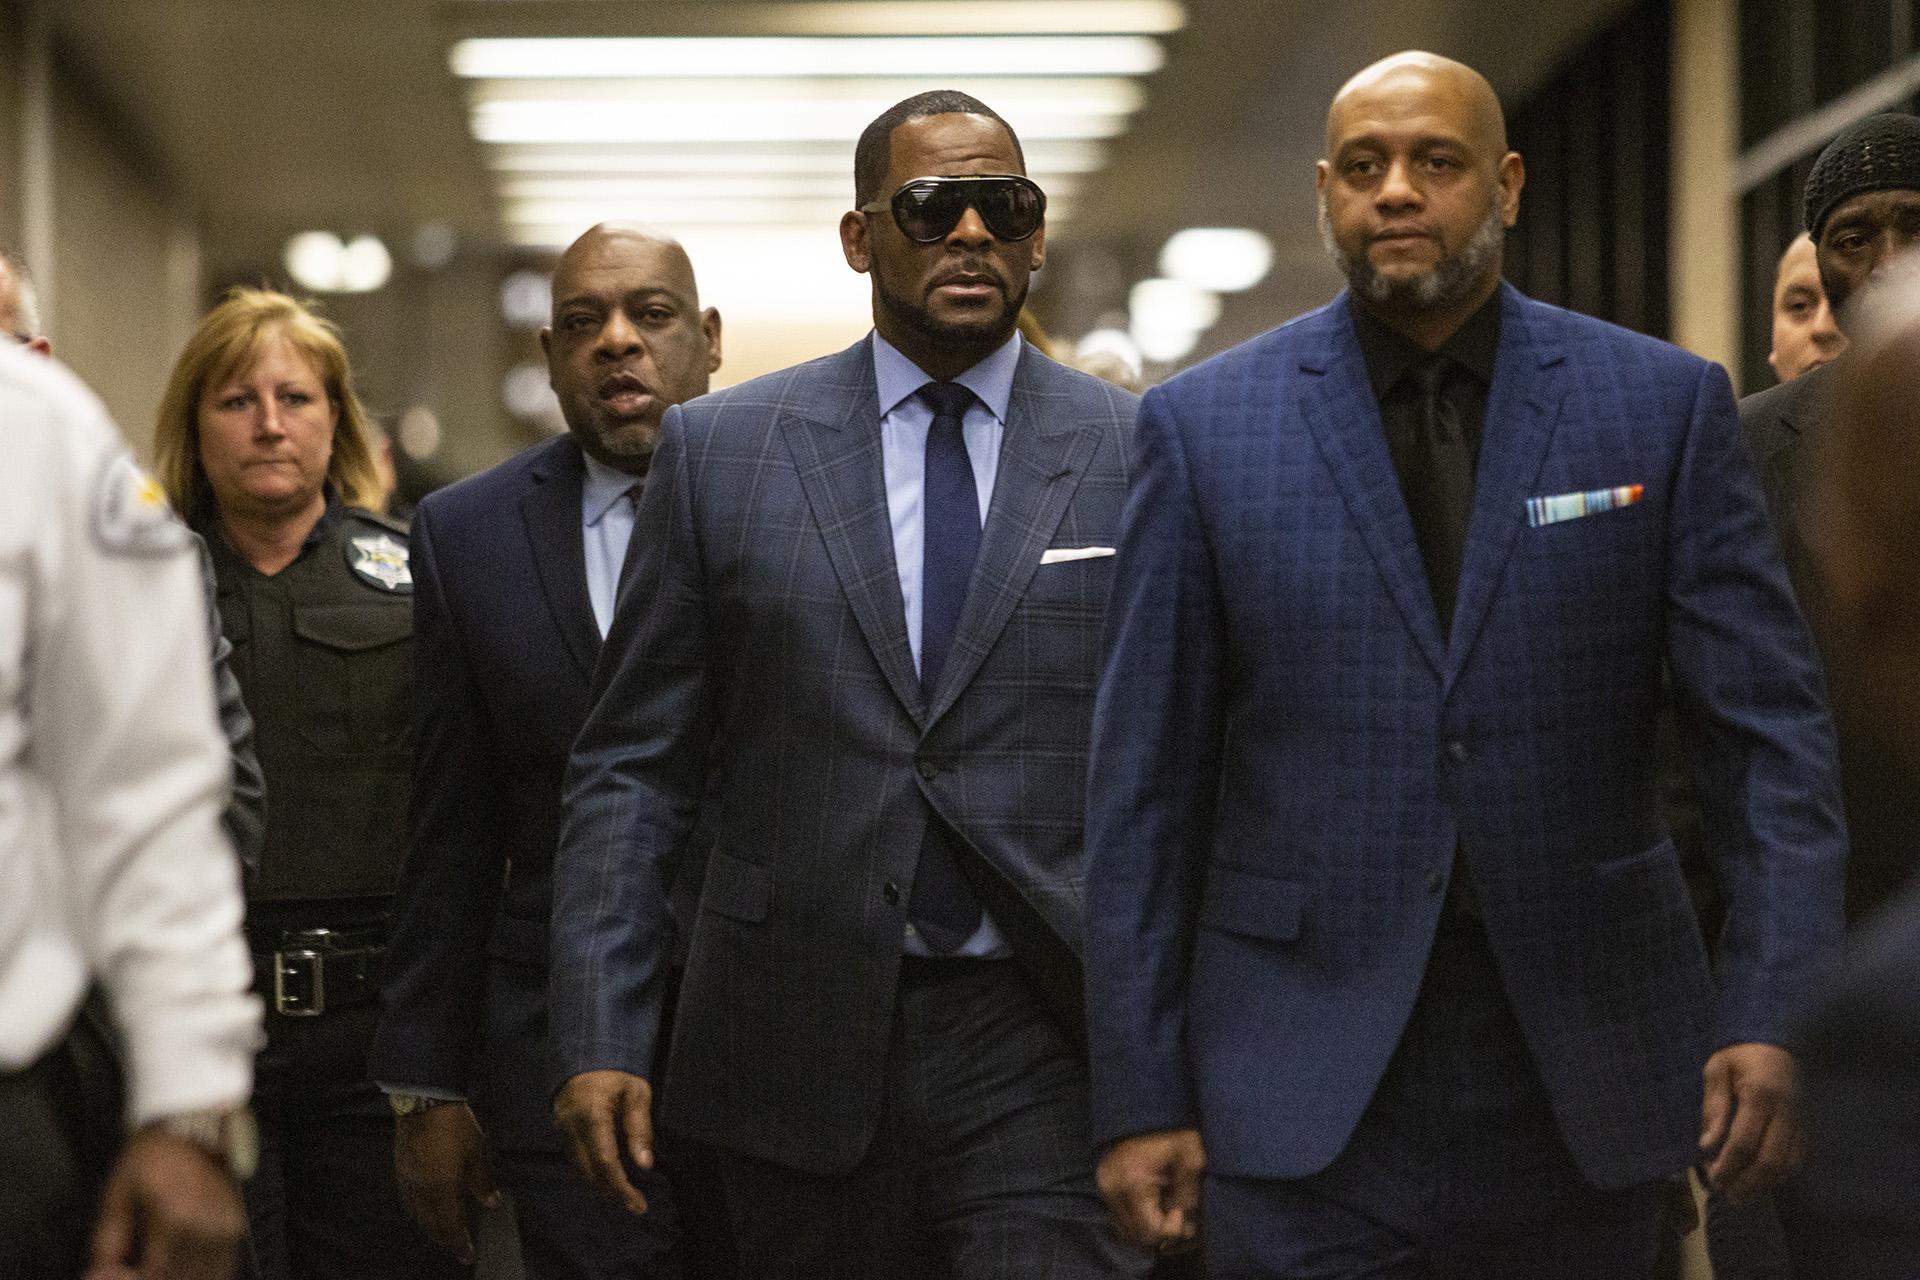 Musician R. Kelly arrives at the Daley Center for a hearing in his child support case at the Daley Center, Wednesday, March 6, 2019, in Chicago. (Ashlee Rezin / Chicago Sun-Times via AP)